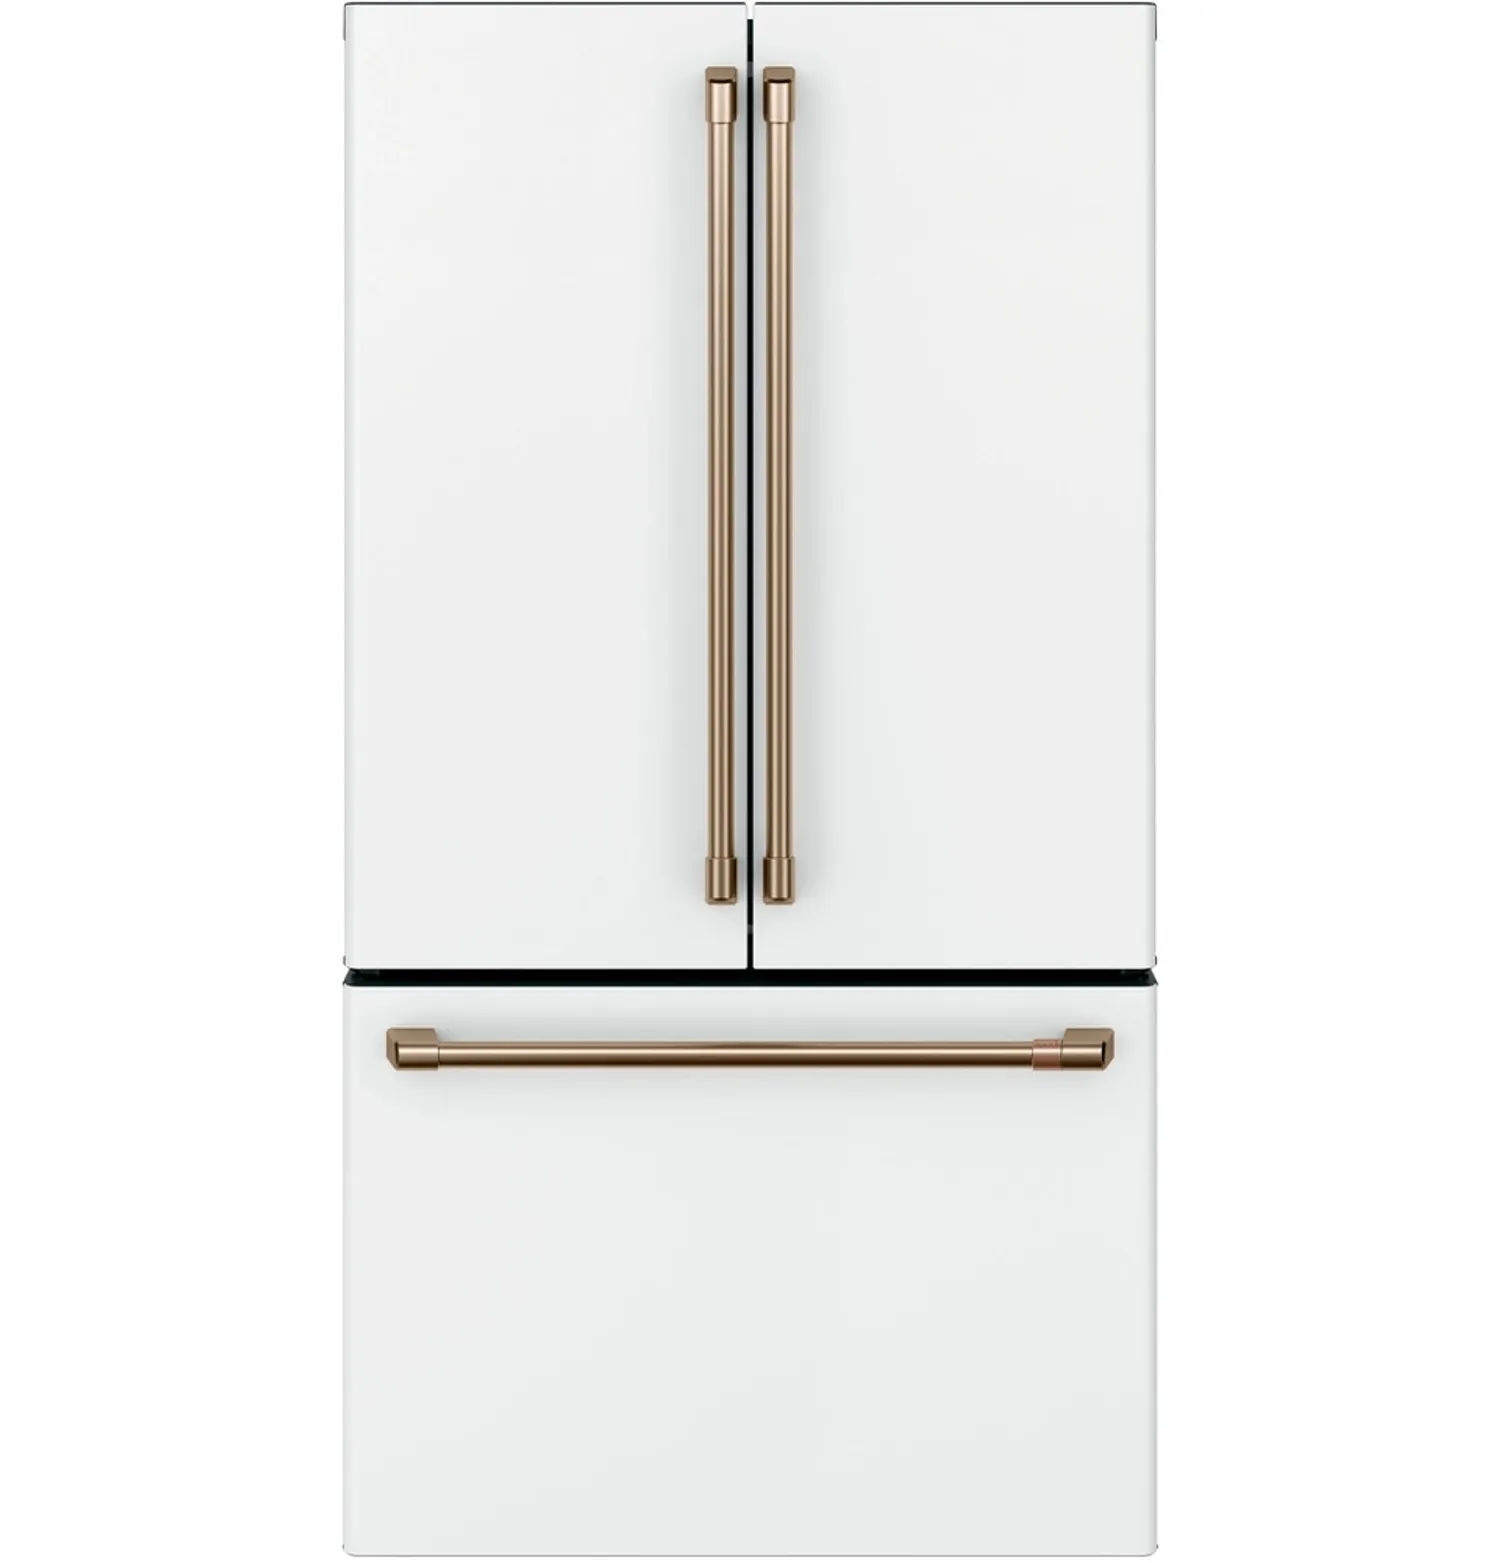 Shop Café Energy Star Smart Counter-Depth French-Door Refrigerator in Matte White with Brushed Bronze Hardware from Café on Openhaus